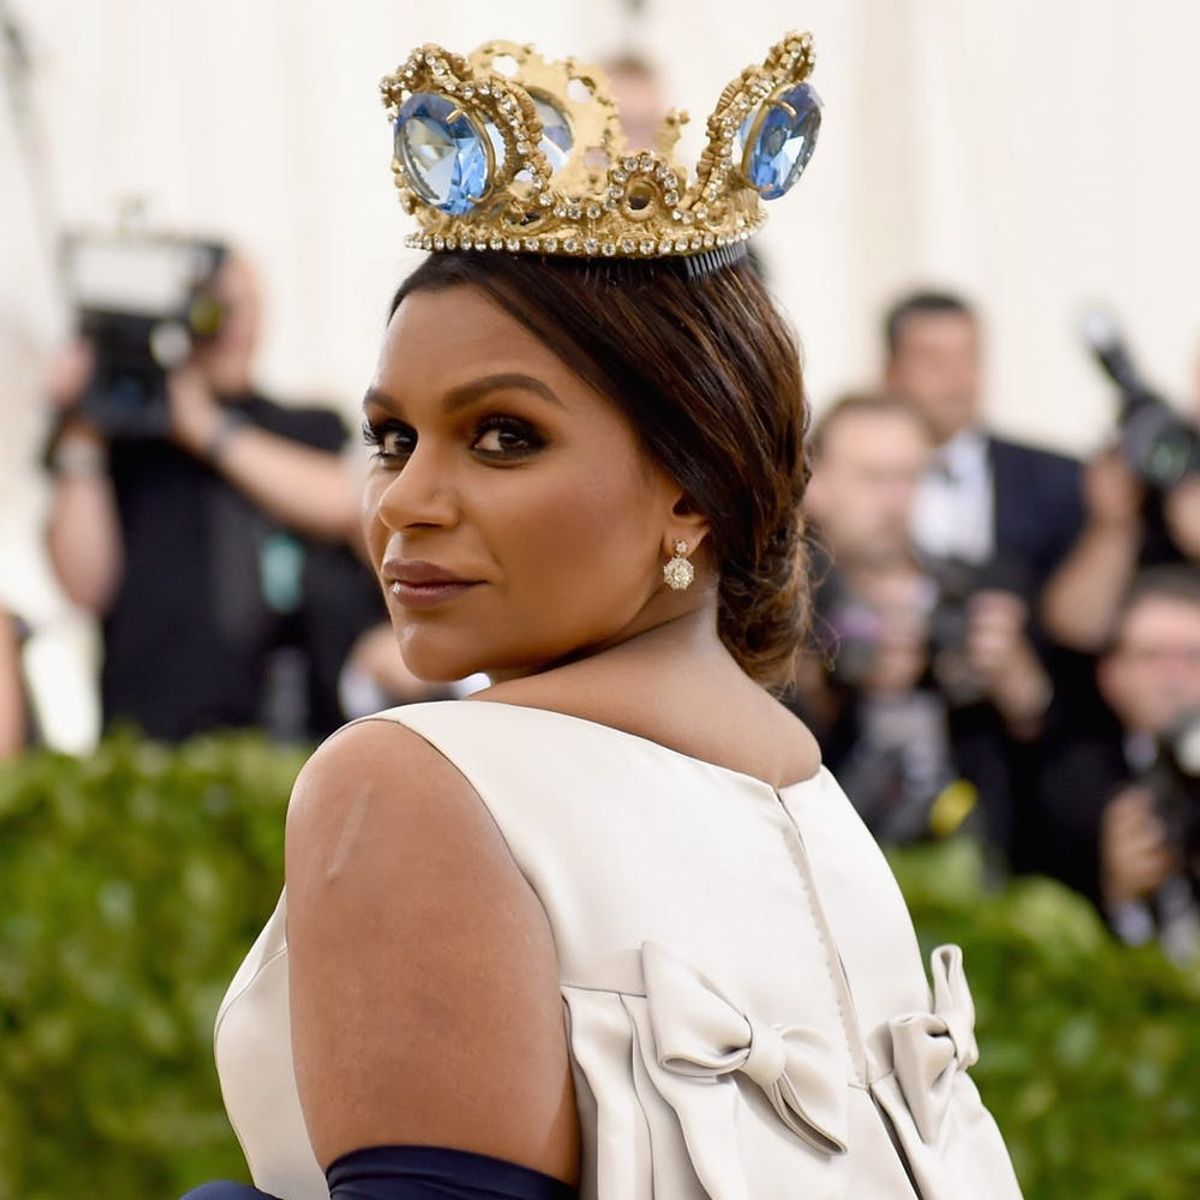 Mindy Kaling Wants to Teach Her Daughter This Important Lesson About Self-Love